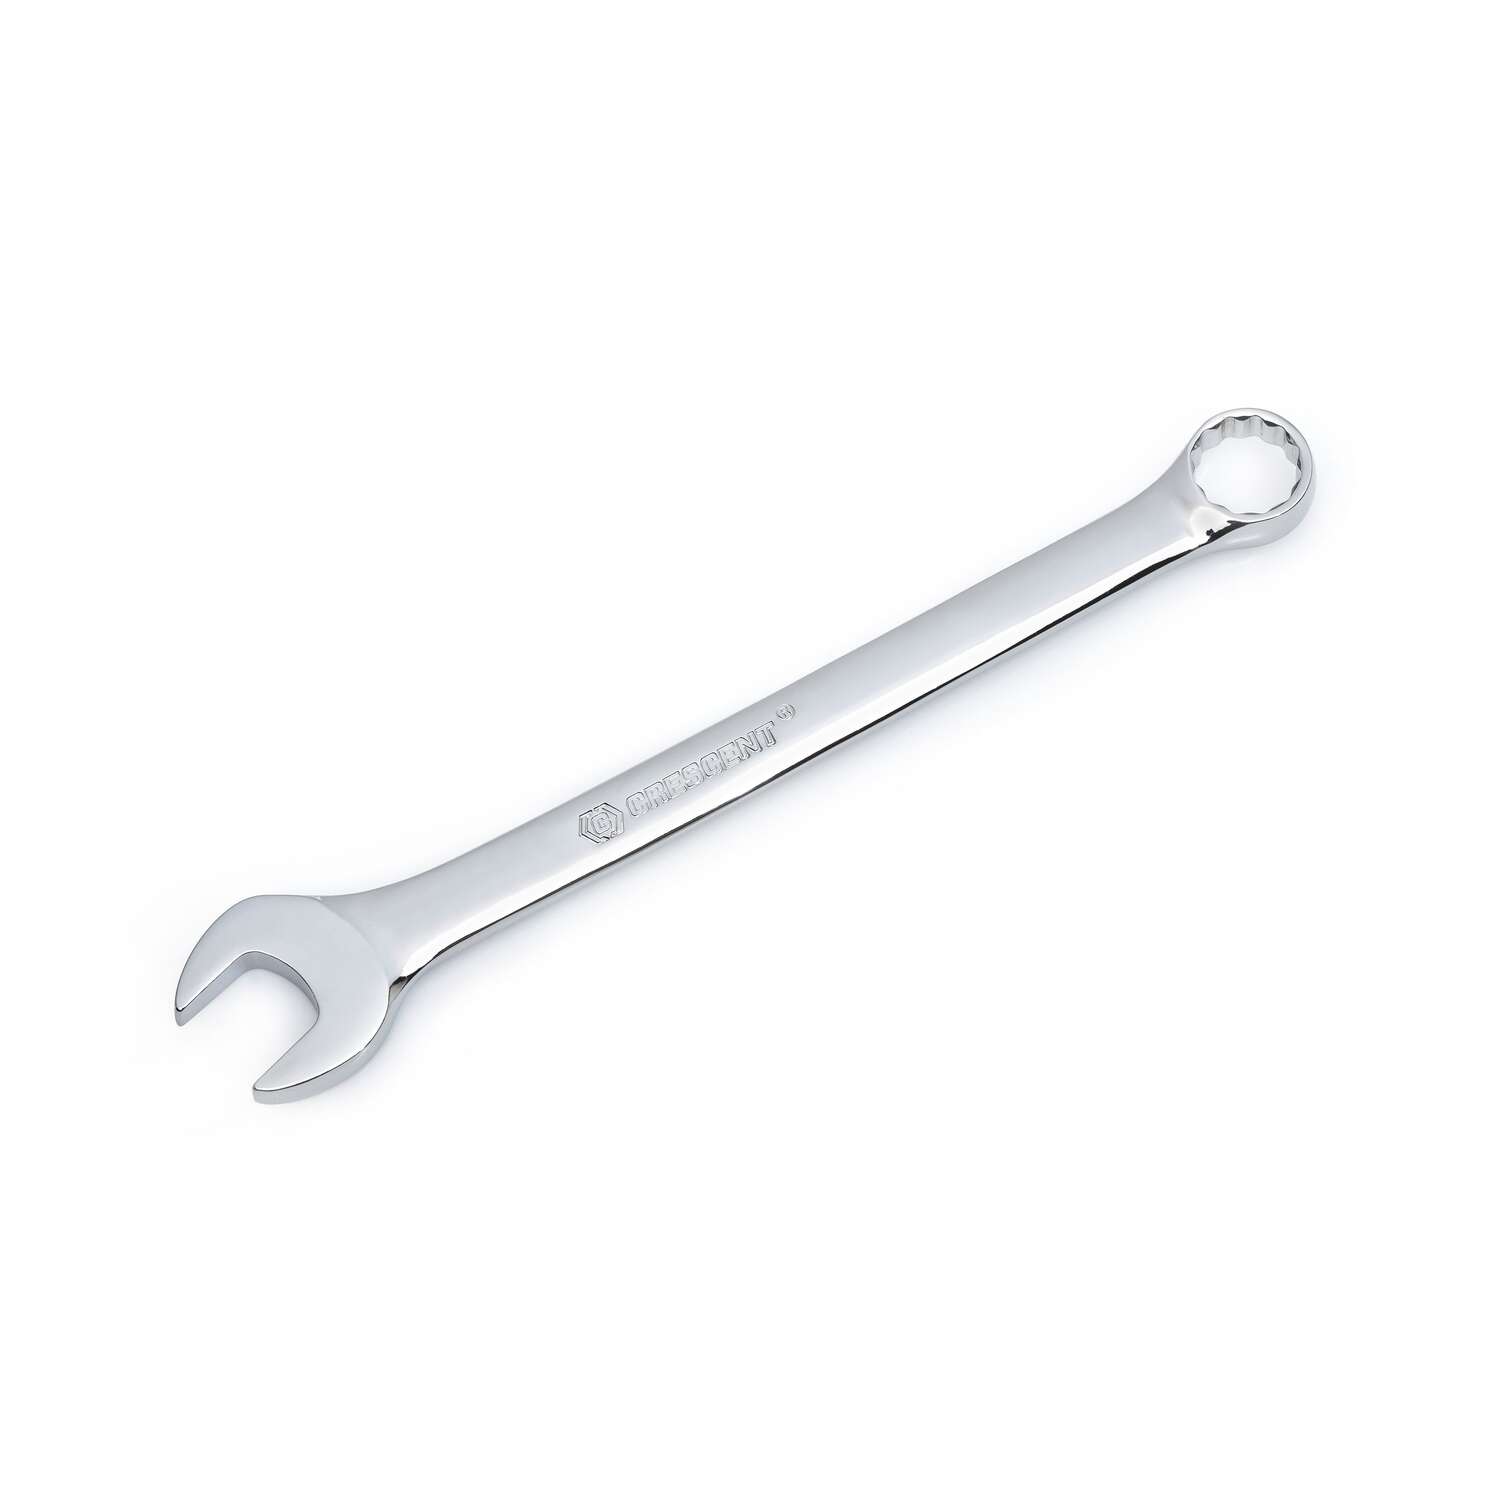 Details about   Armstrong 27-481 Box Wrench 12 Point 1-1/4 in 1-7/16 in Openings 19.438" Length 